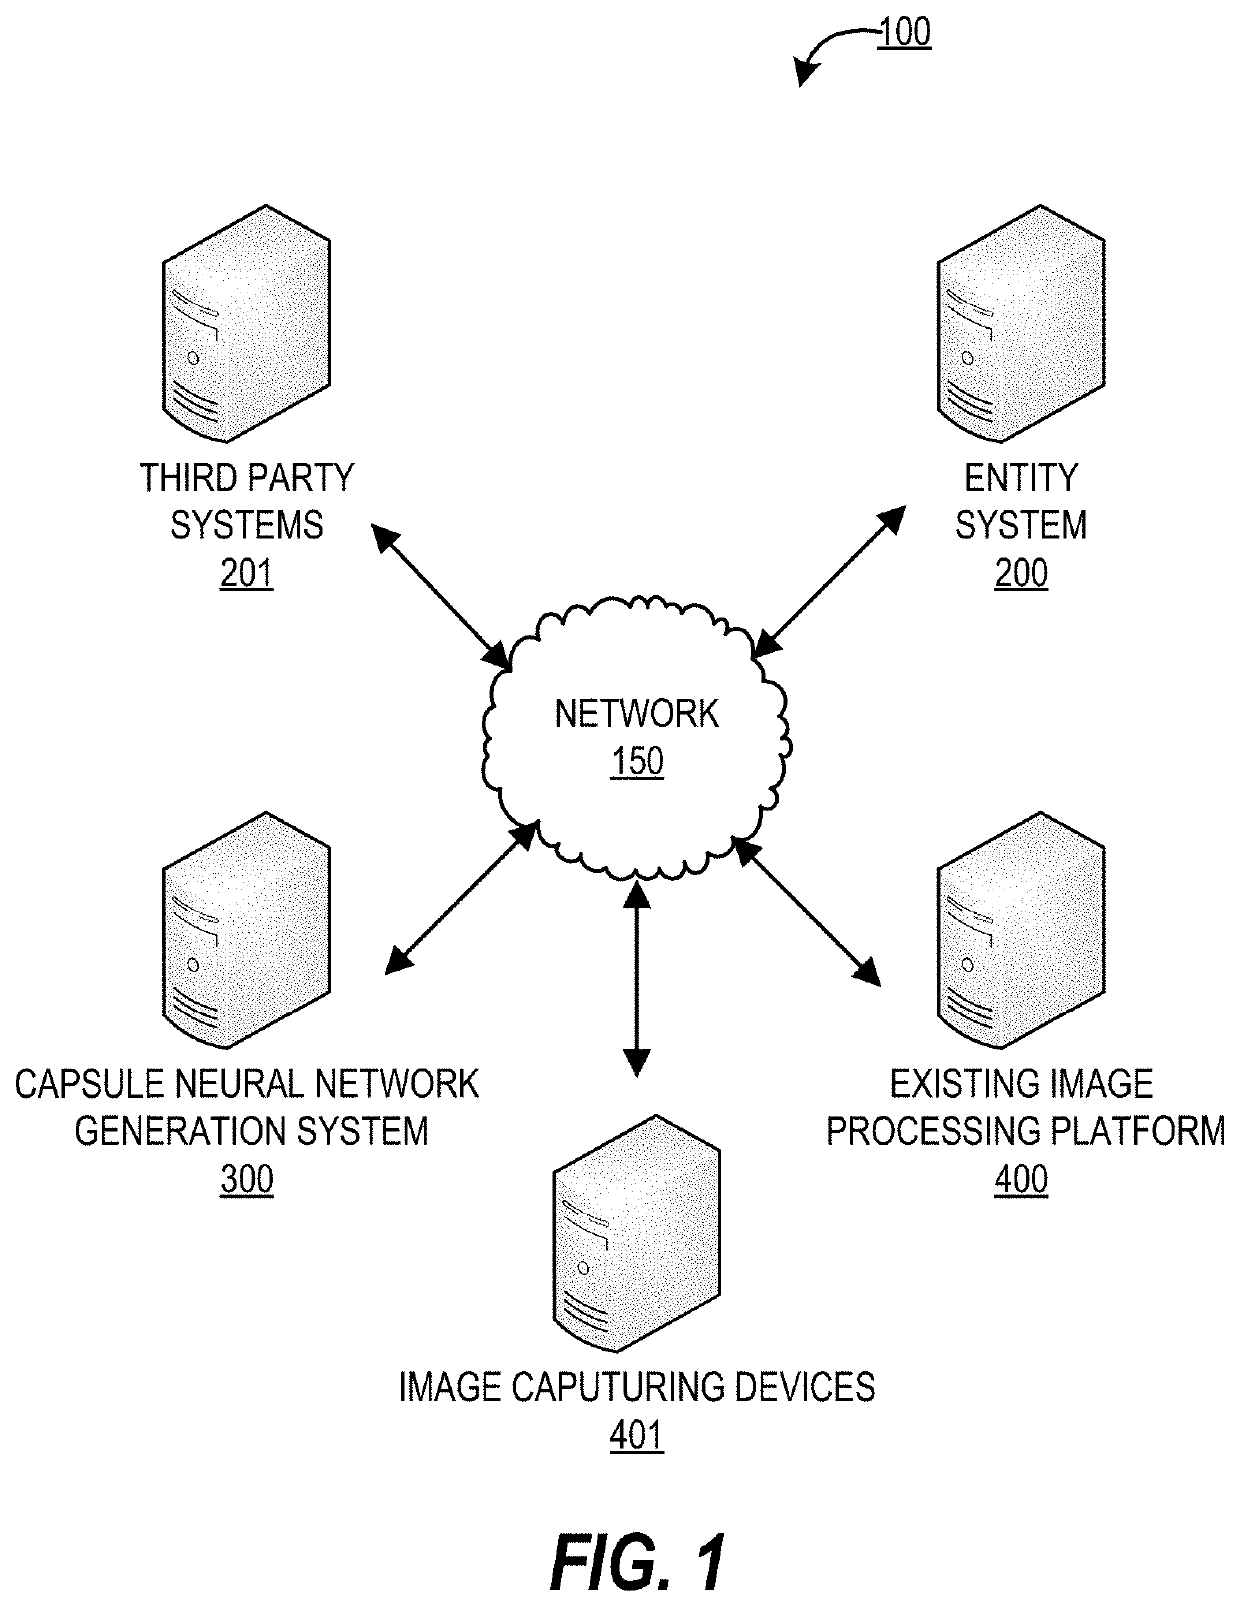 Generation of capsule neural networks for enhancing image processing platforms